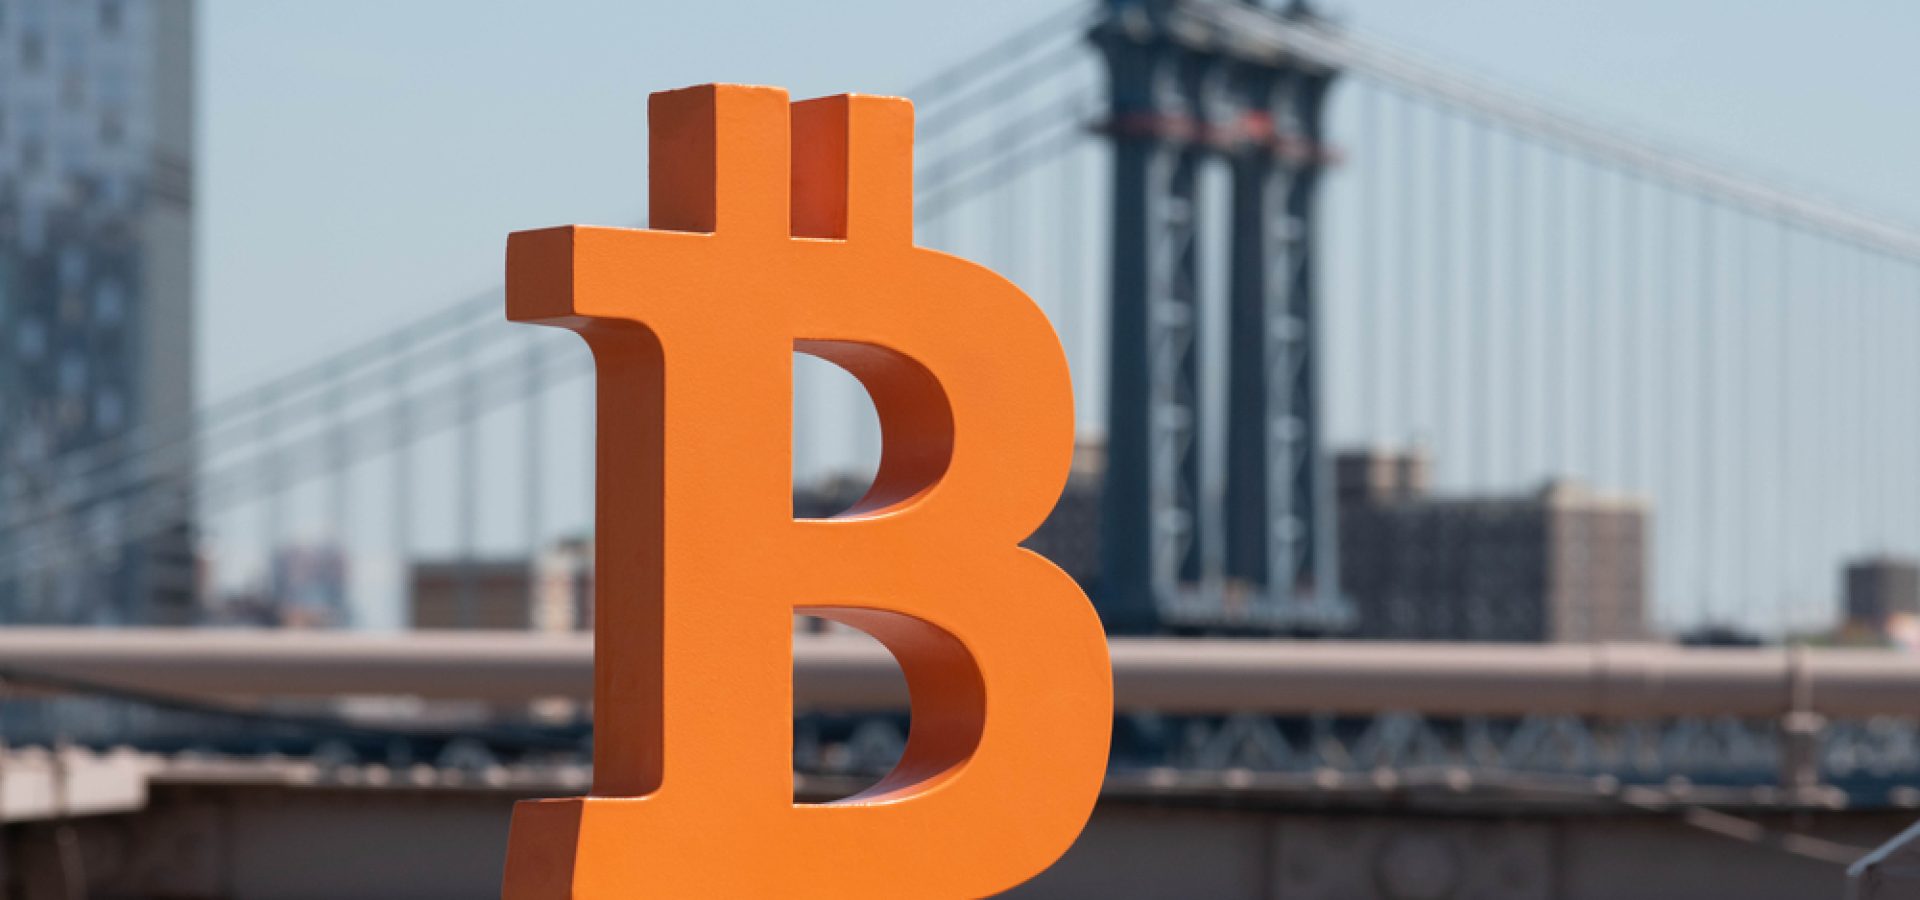 U.S. banks will soon welcome the Bitcoin payment system